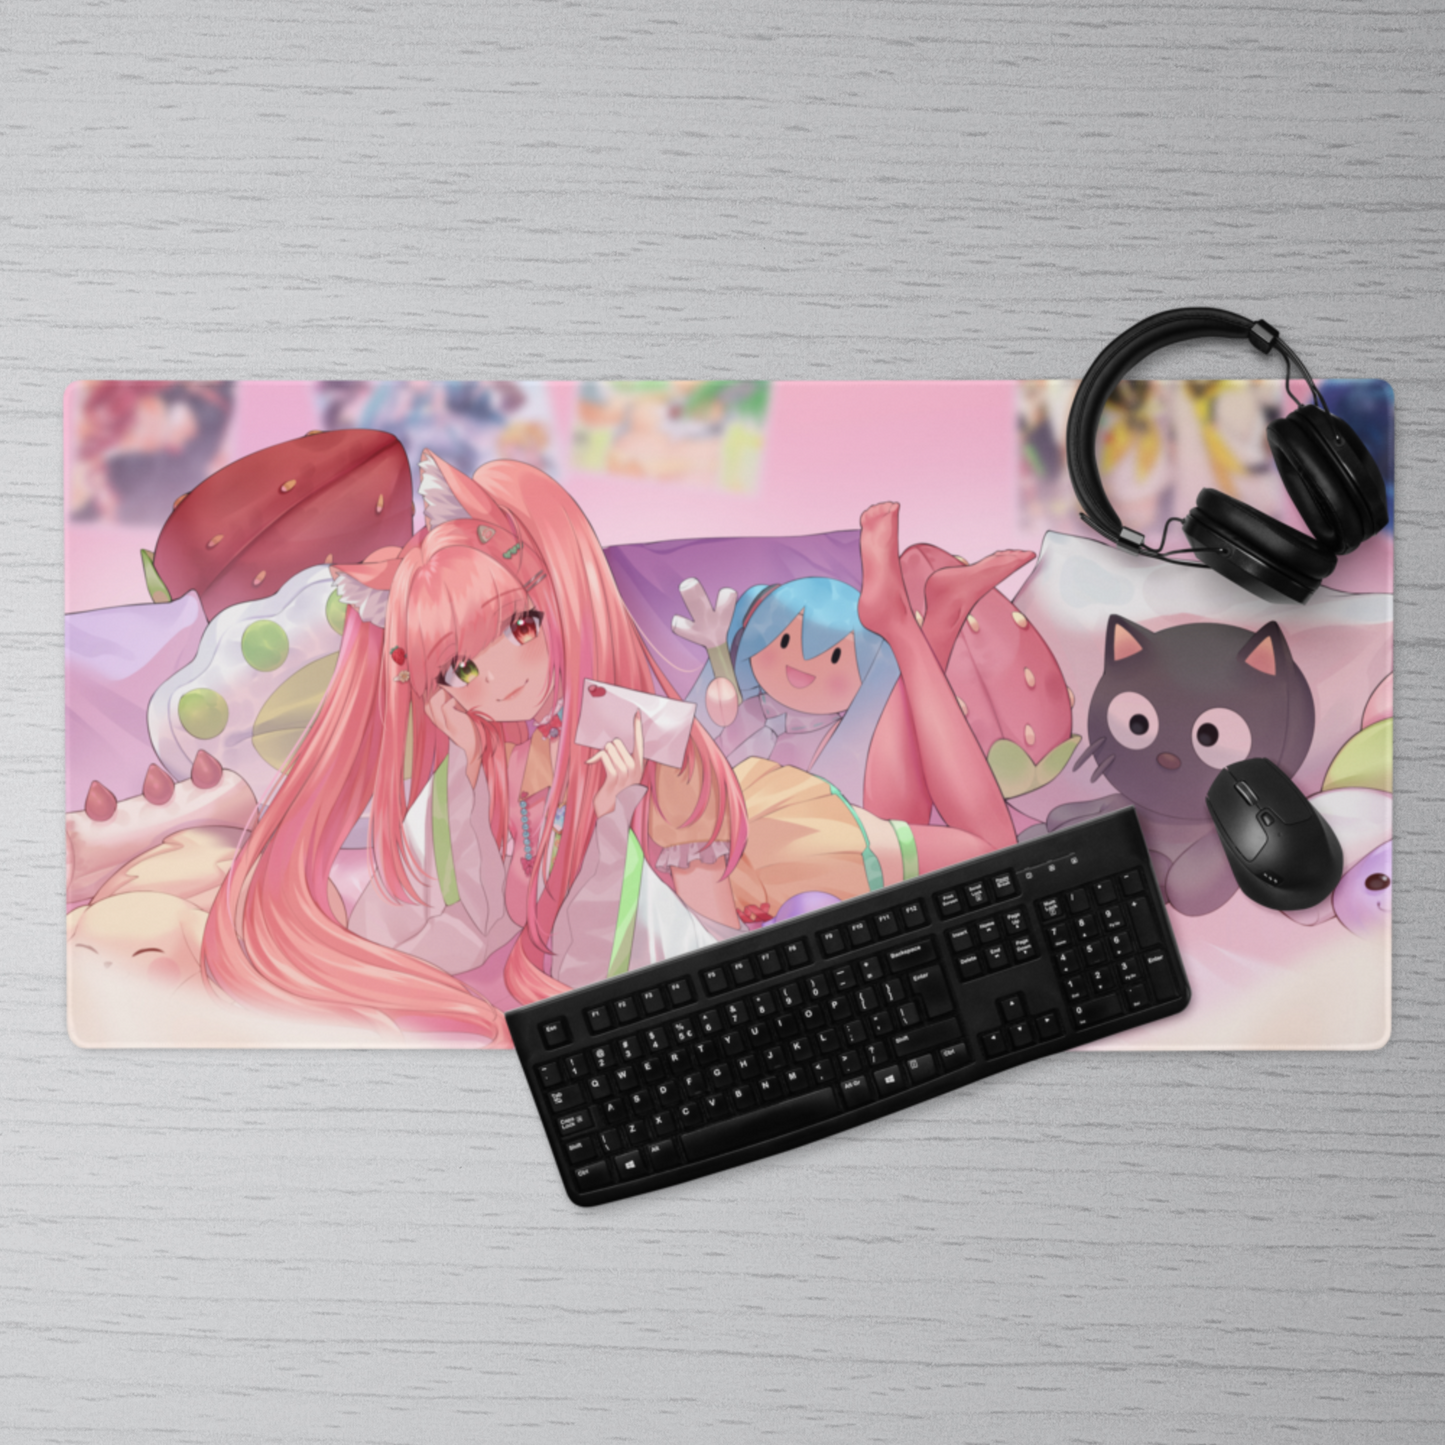 Miraii Cozy Gaming Mouse Pad